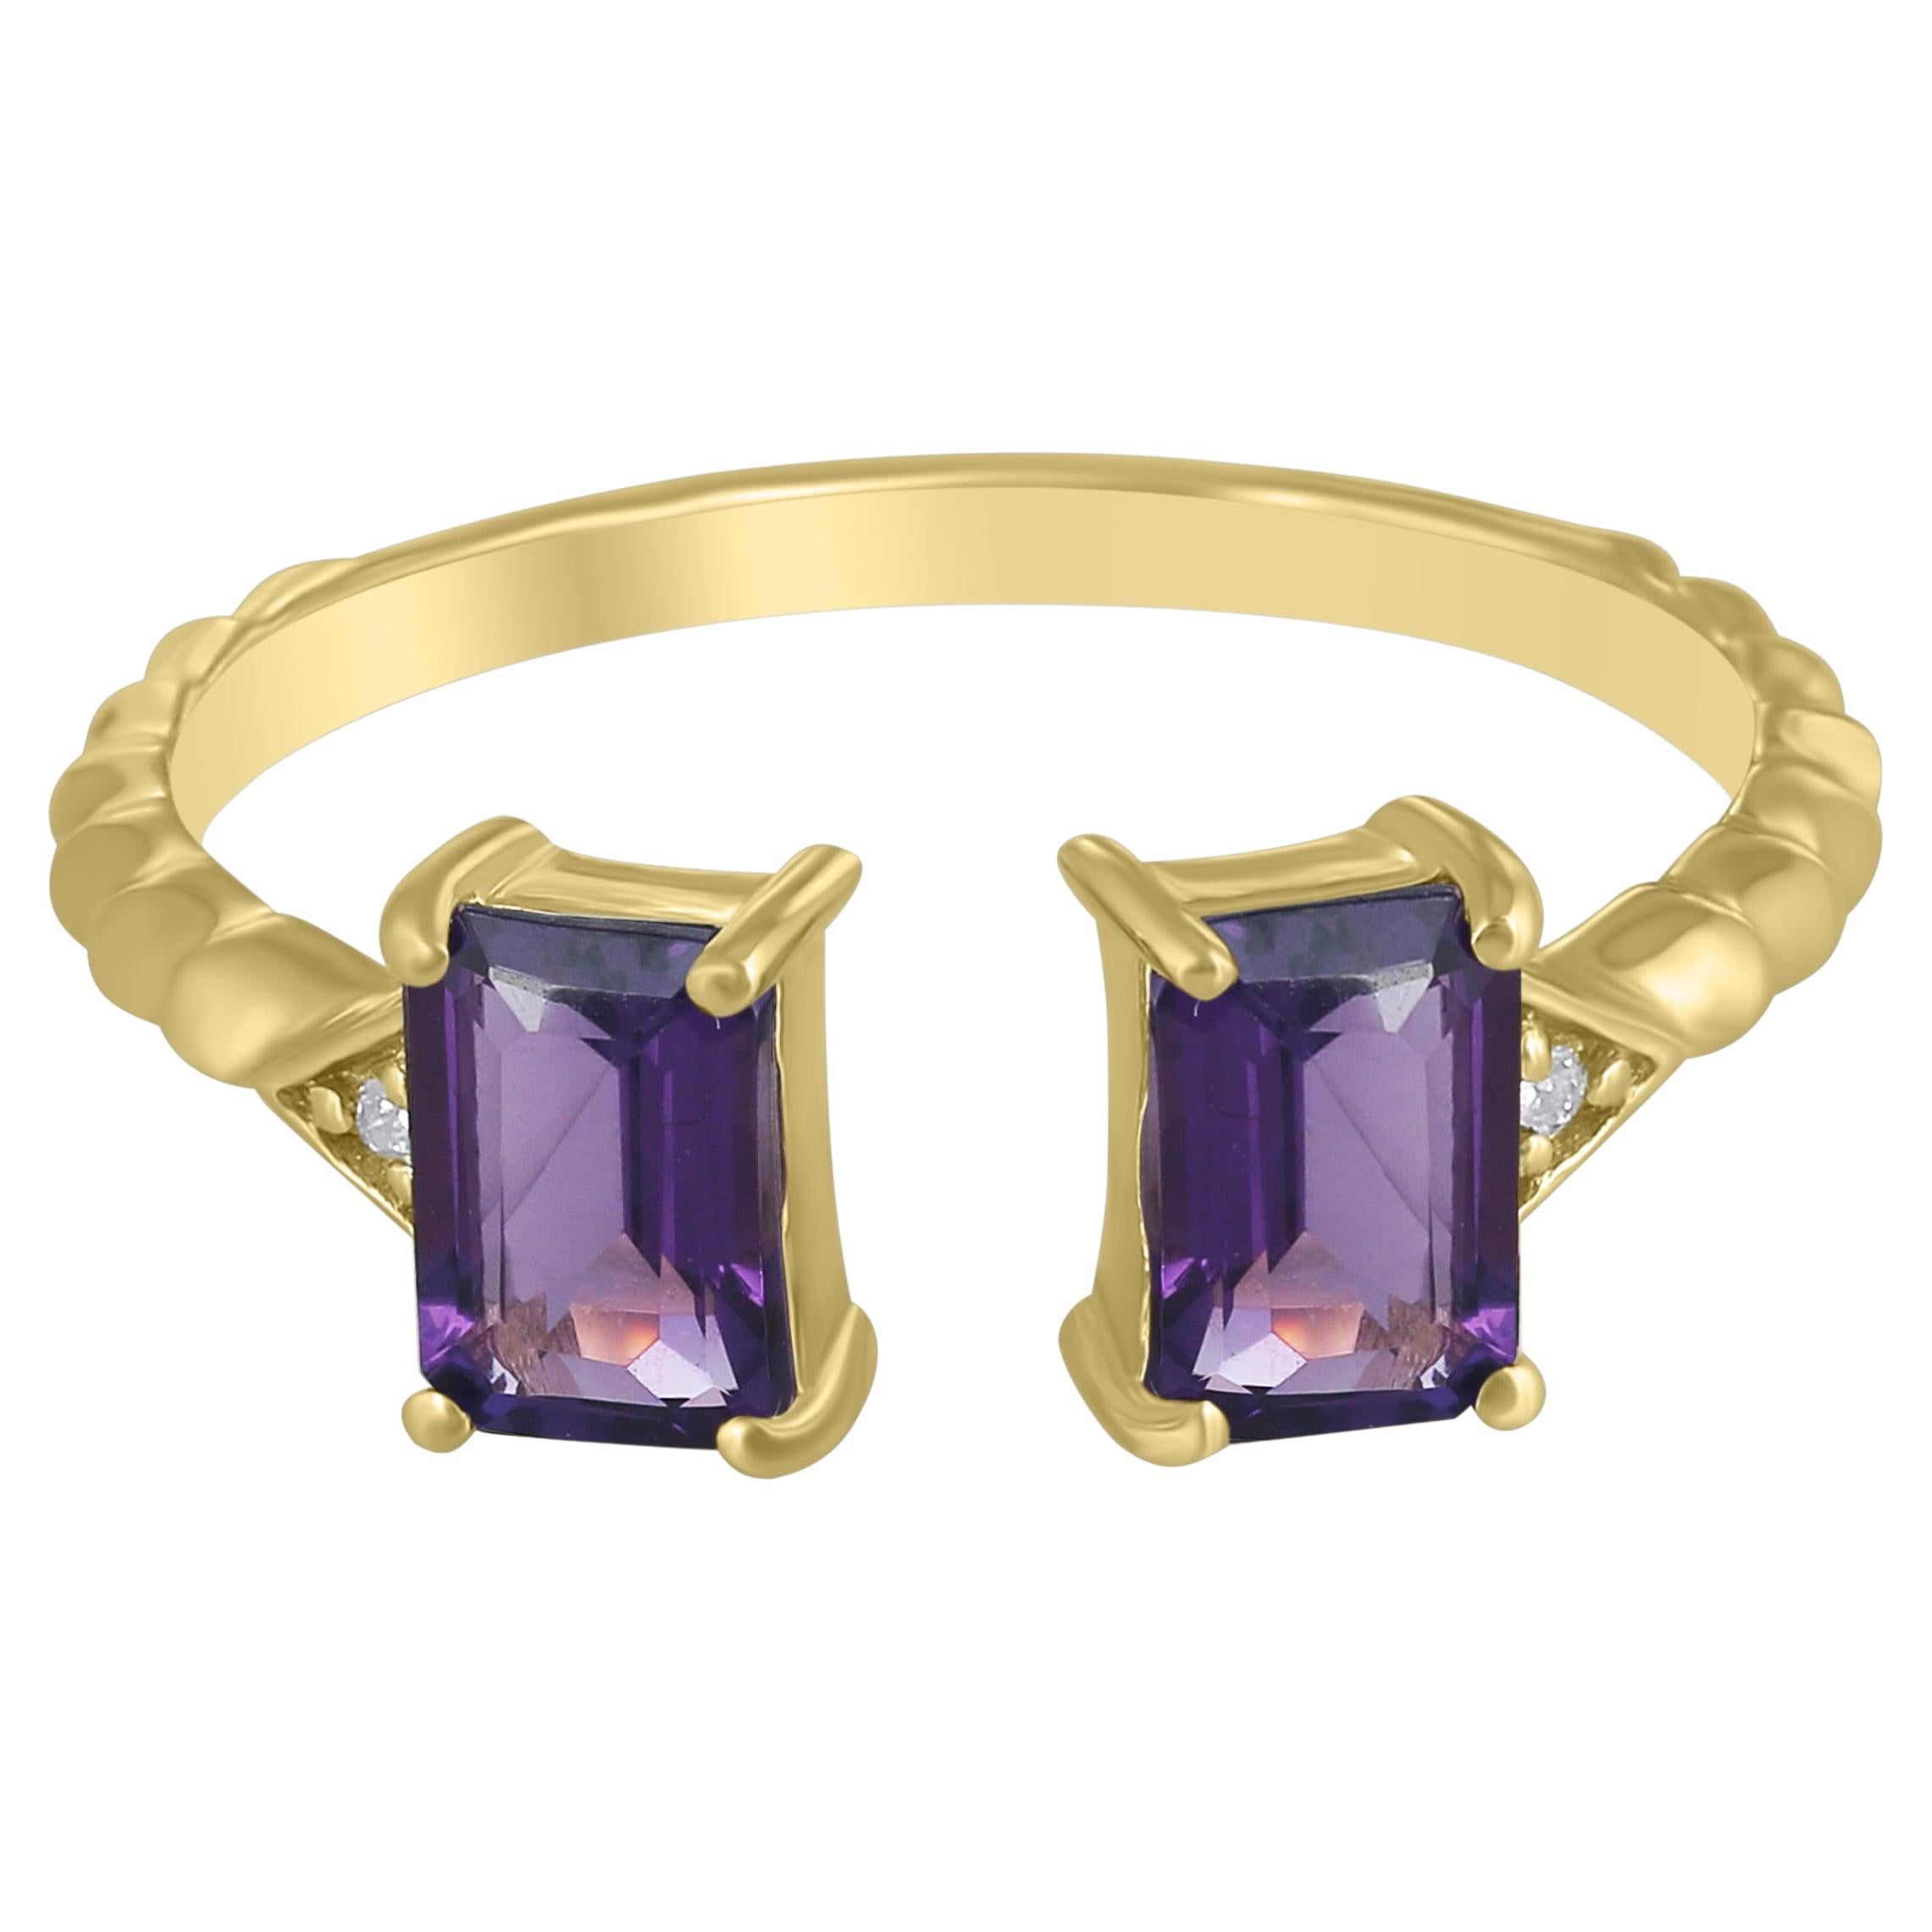 Gemistry 1.12 Cttw. Amethyst and Diamond Cuff Ring in 14K Yellow Gold For Sale